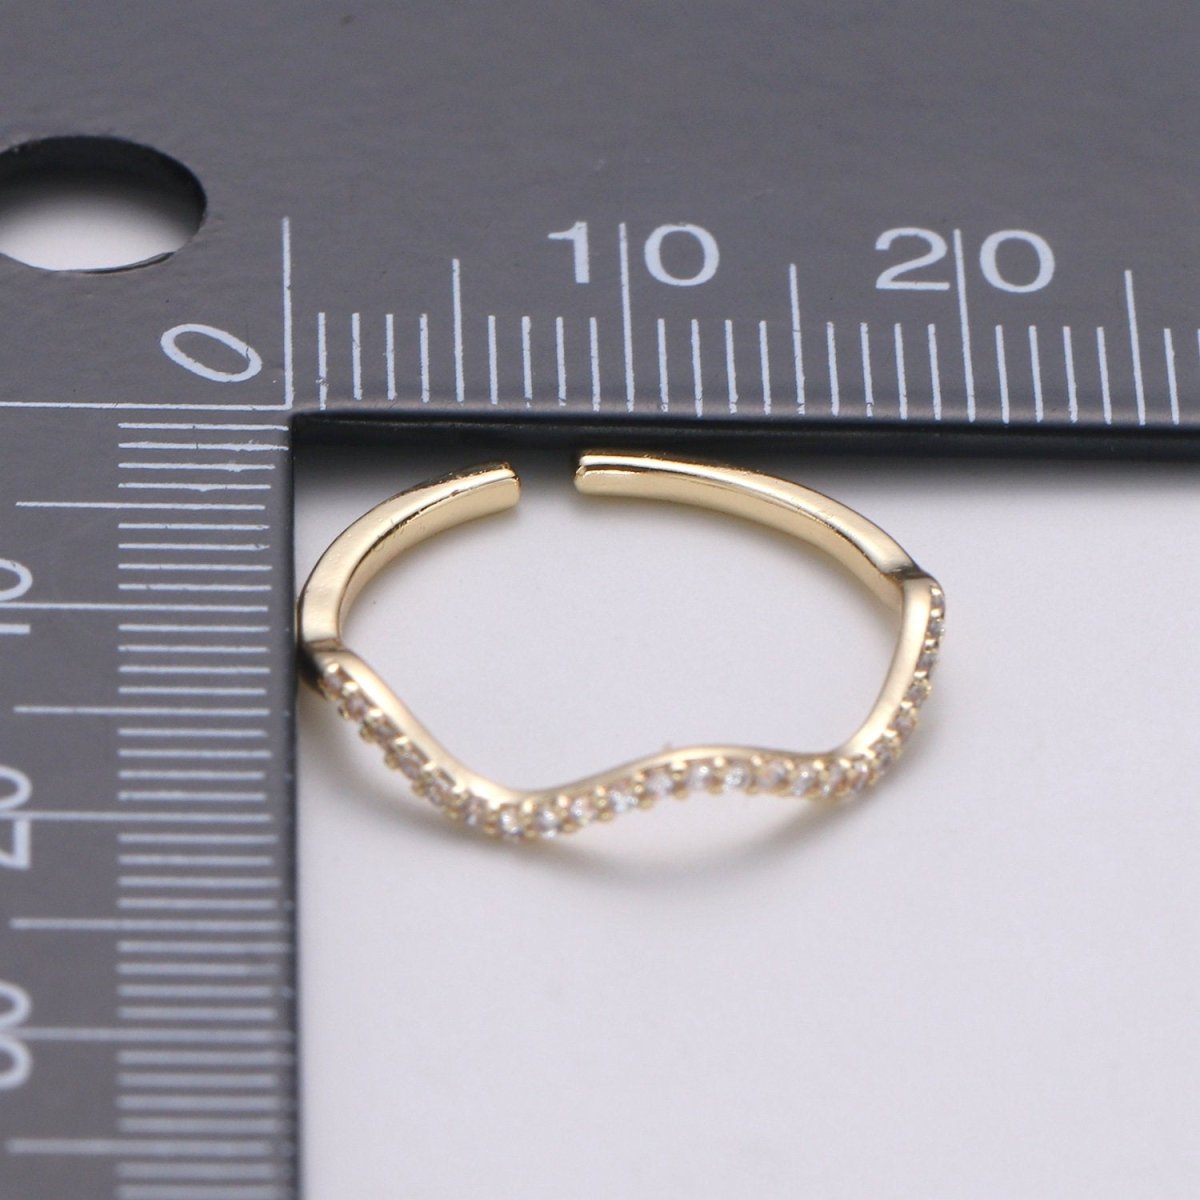 Cz Gold wave ring, Micro Pave Open Ring Gold Vermeil ring, Dainty wave ring, Ocean ring, Micro Pave Stacking rings, Beach ring gold wave | R-123 - DLUXCA